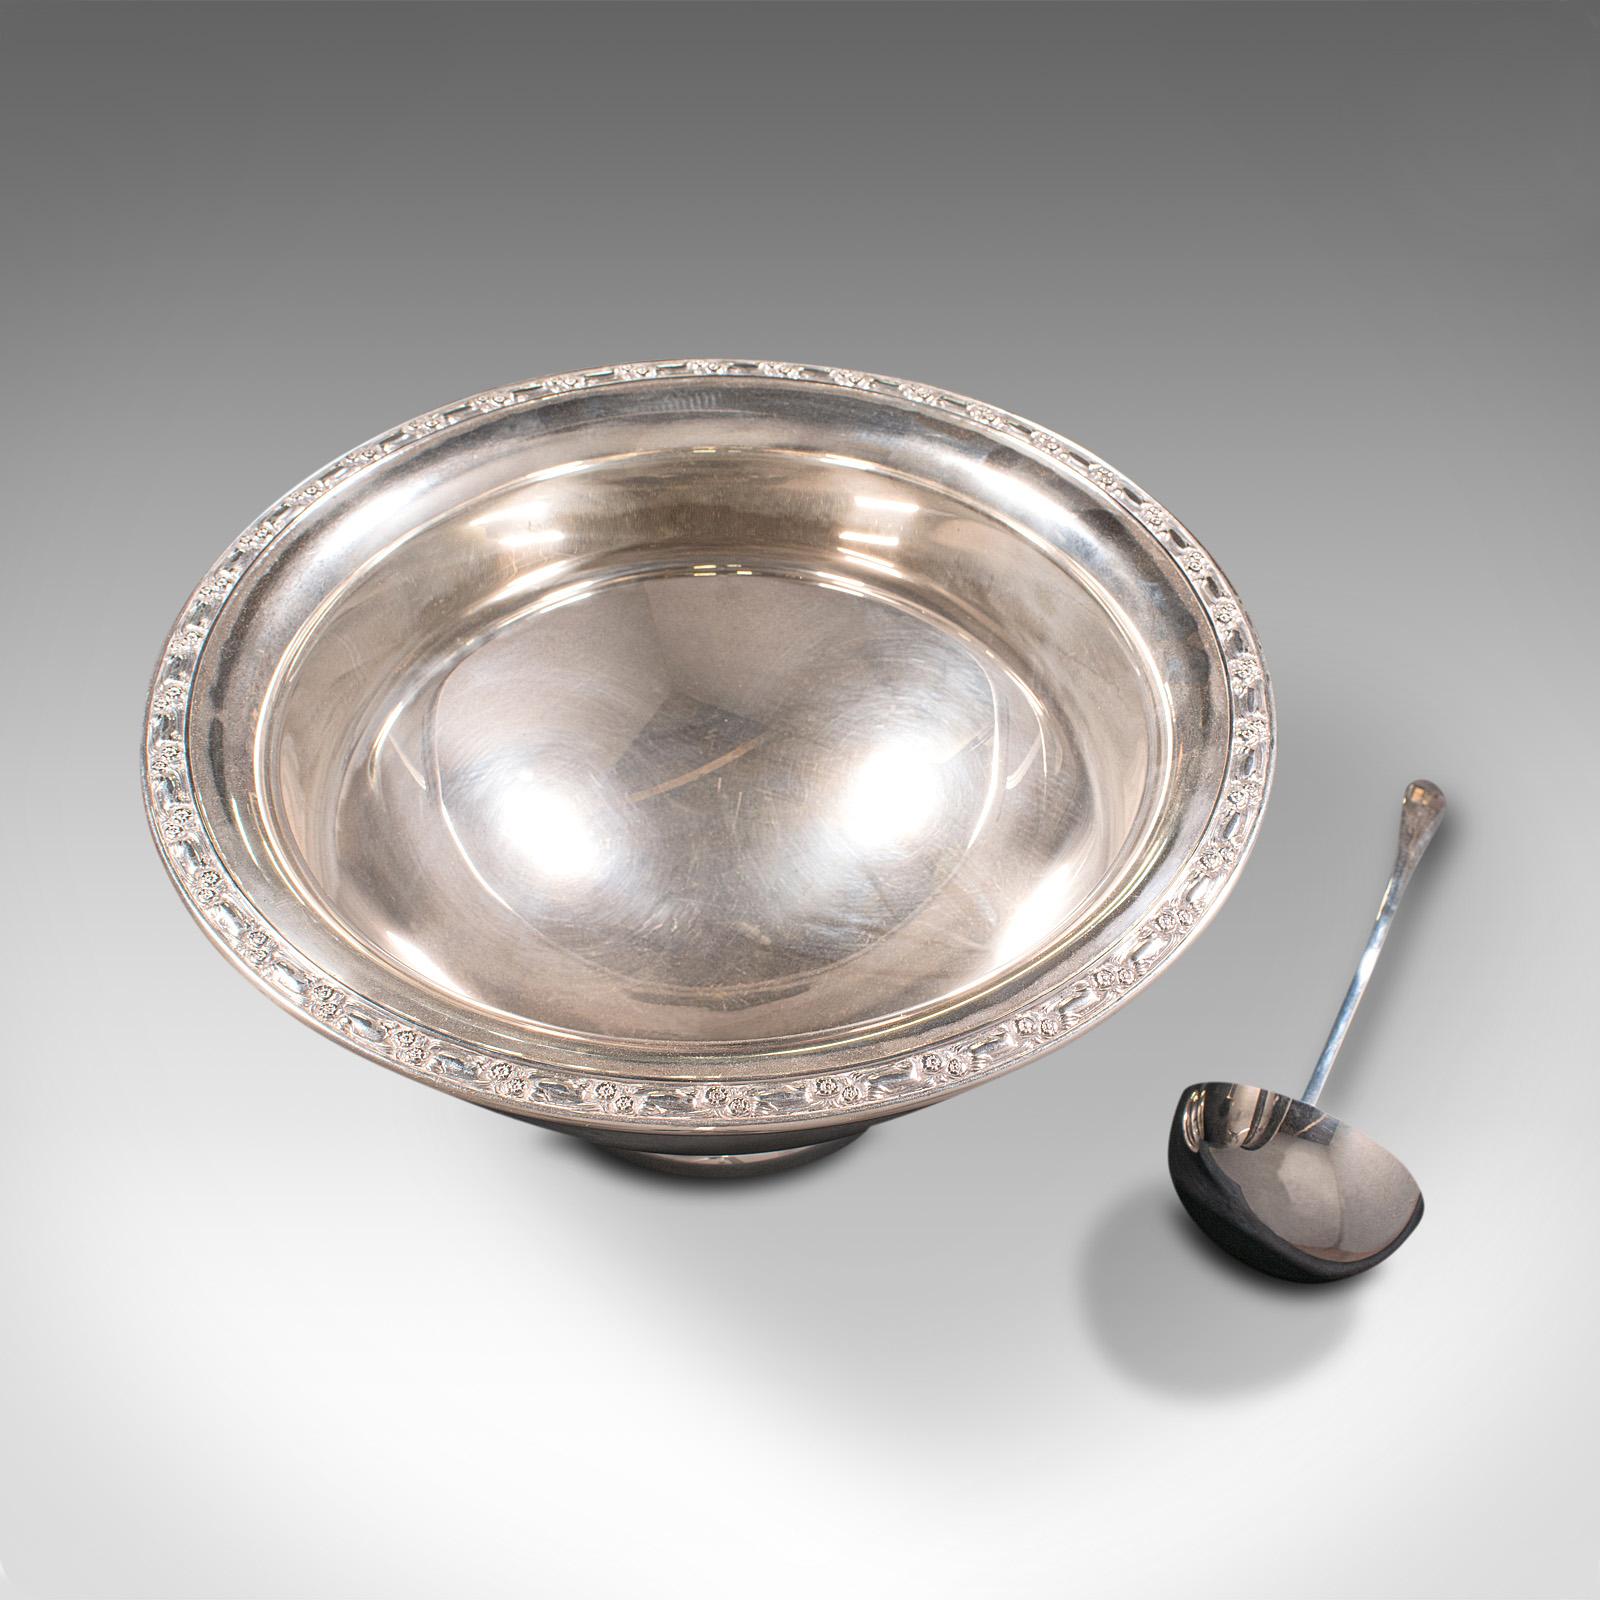 Vintage Punch Bowl, American, Silver Plate, Serving Dish, Spoon, Mid 20th C In Good Condition For Sale In Hele, Devon, GB